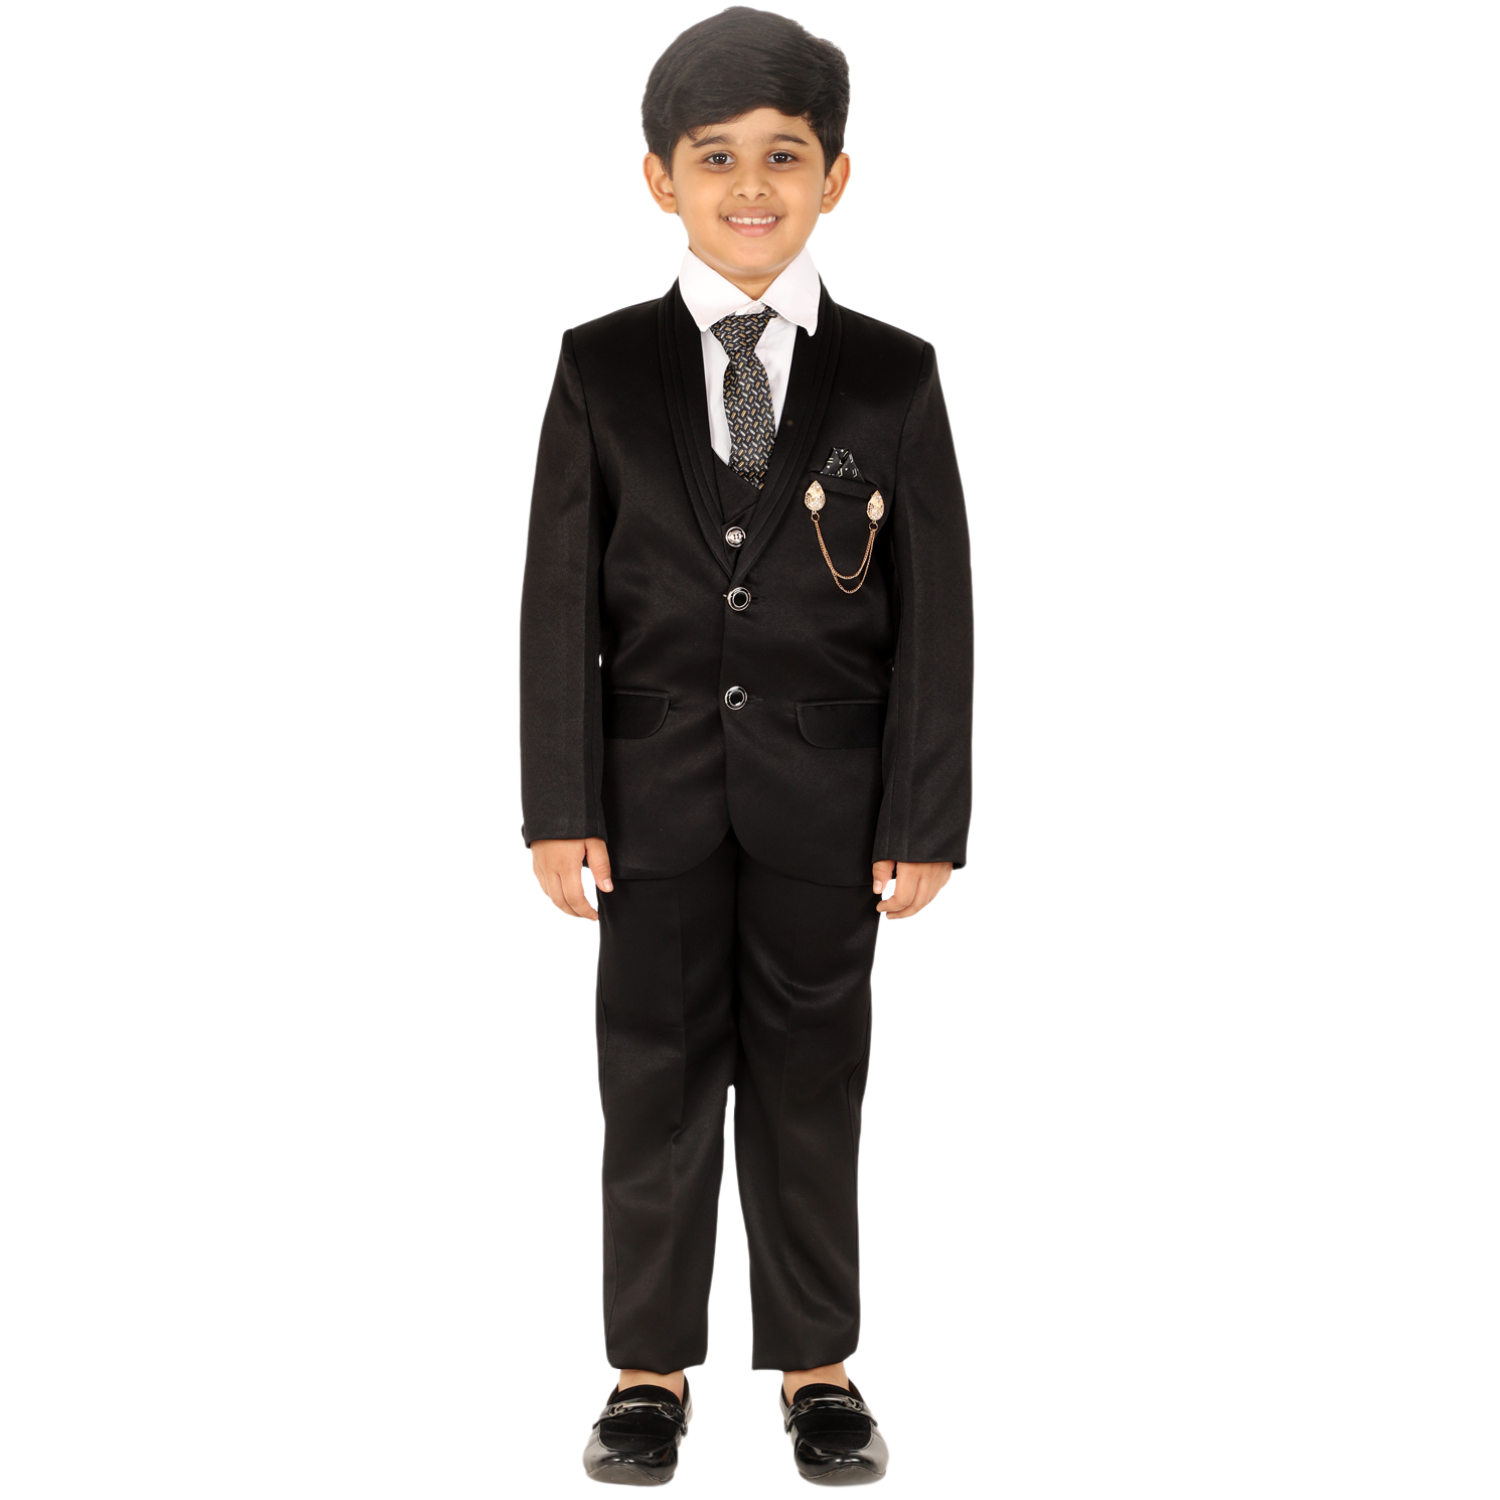 Amazon.com: A&J DESIGN Boys Suit Tuxedo Formal Dress Wedding Ring Bearer  Graduation Easter Outfit Size 6 Black: Clothing, Shoes & Jewelry